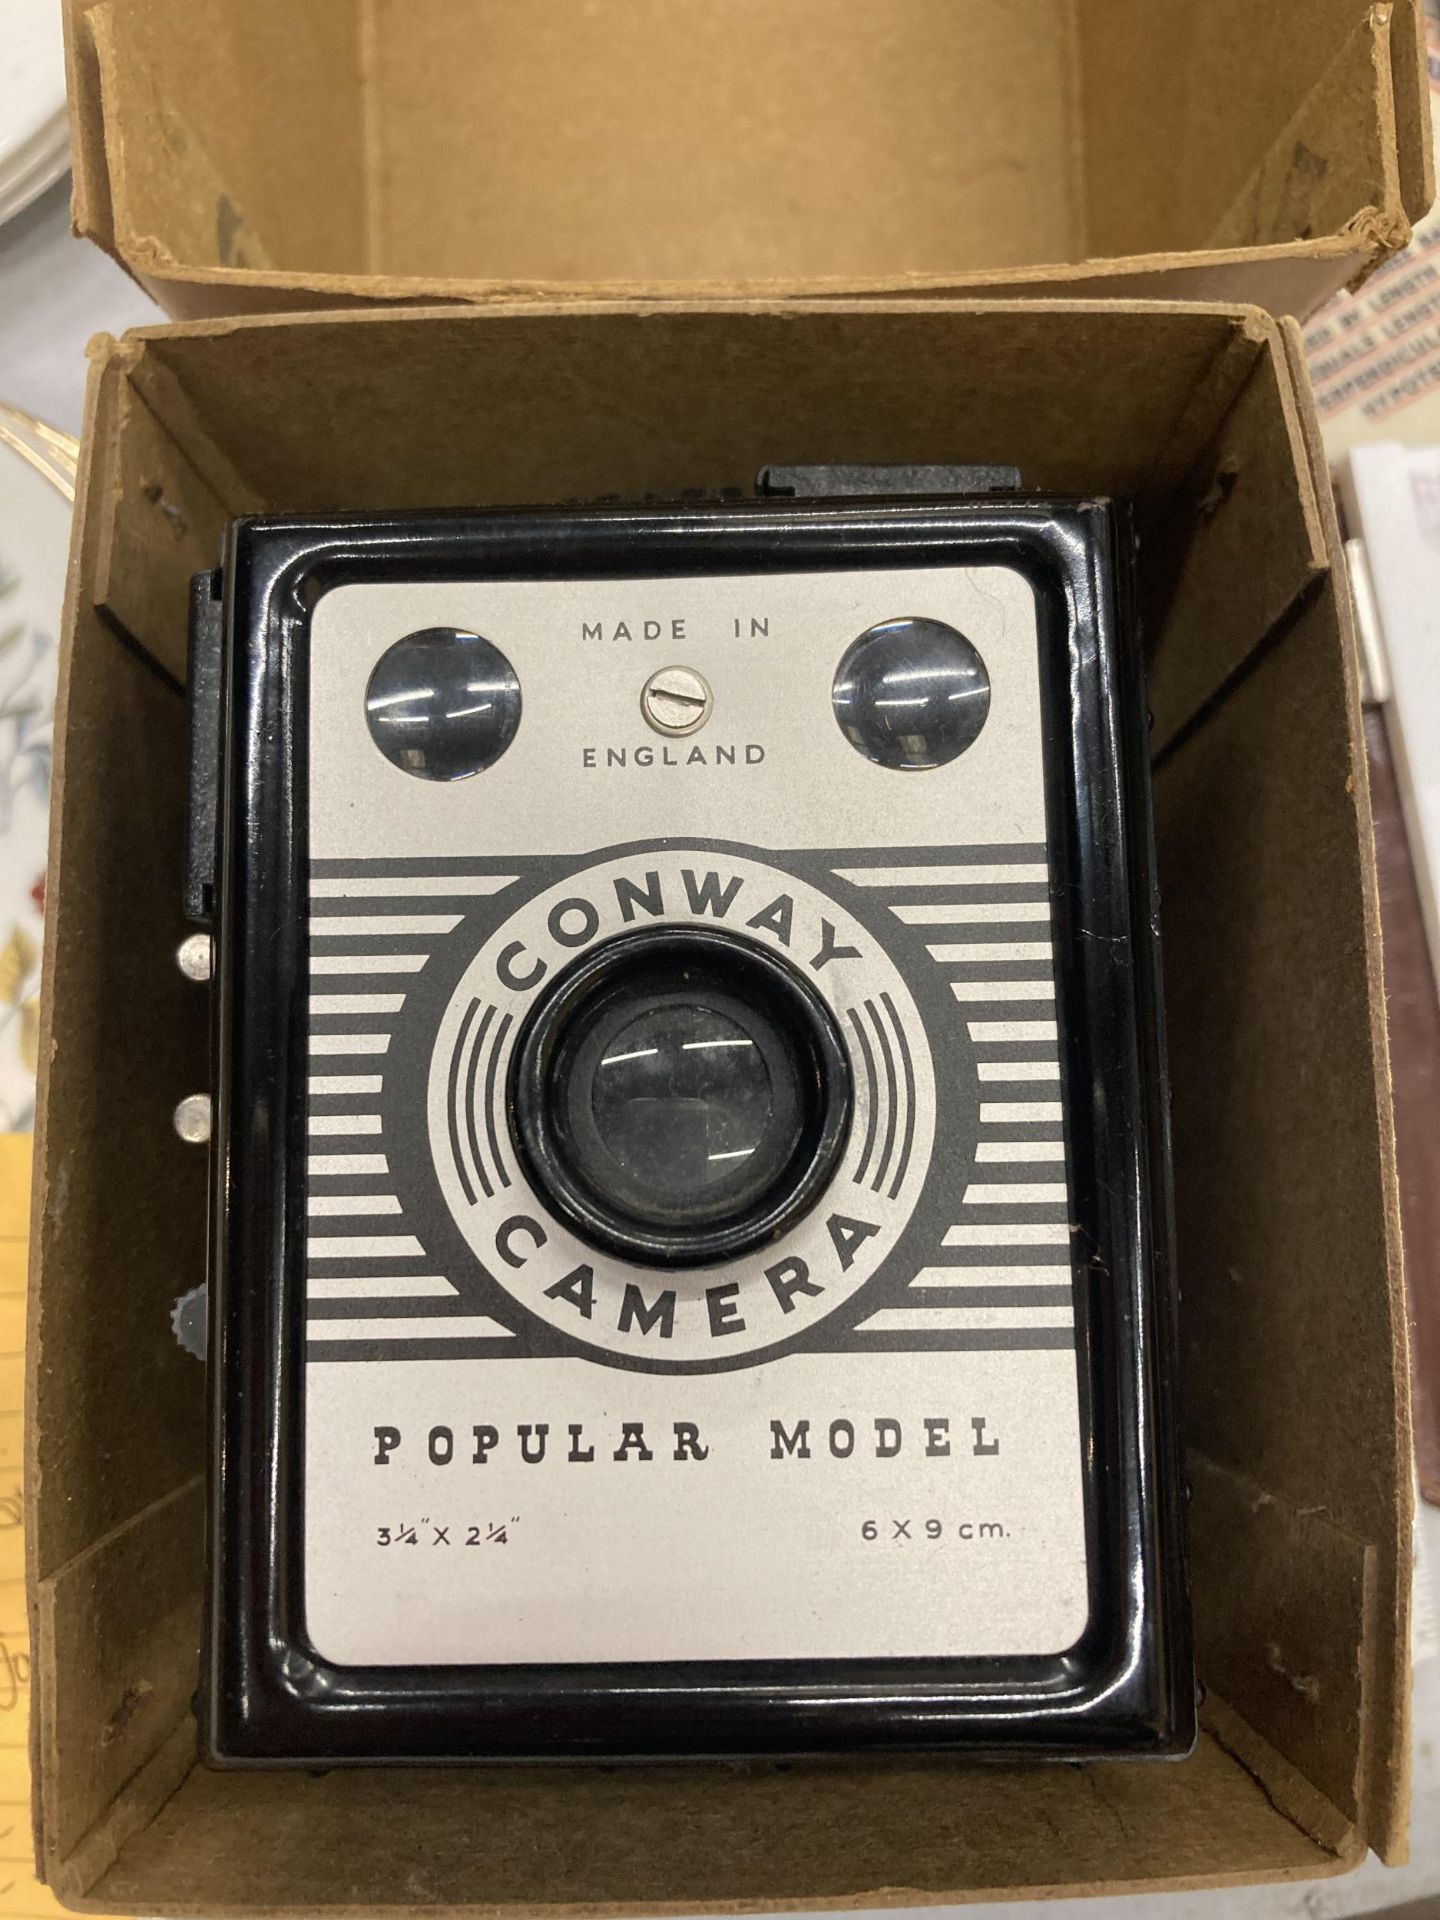 A CONWAY POPULAR MODEL BOX CAMERA WITH BOX AND ORIGINAL INSTRUCTIONS